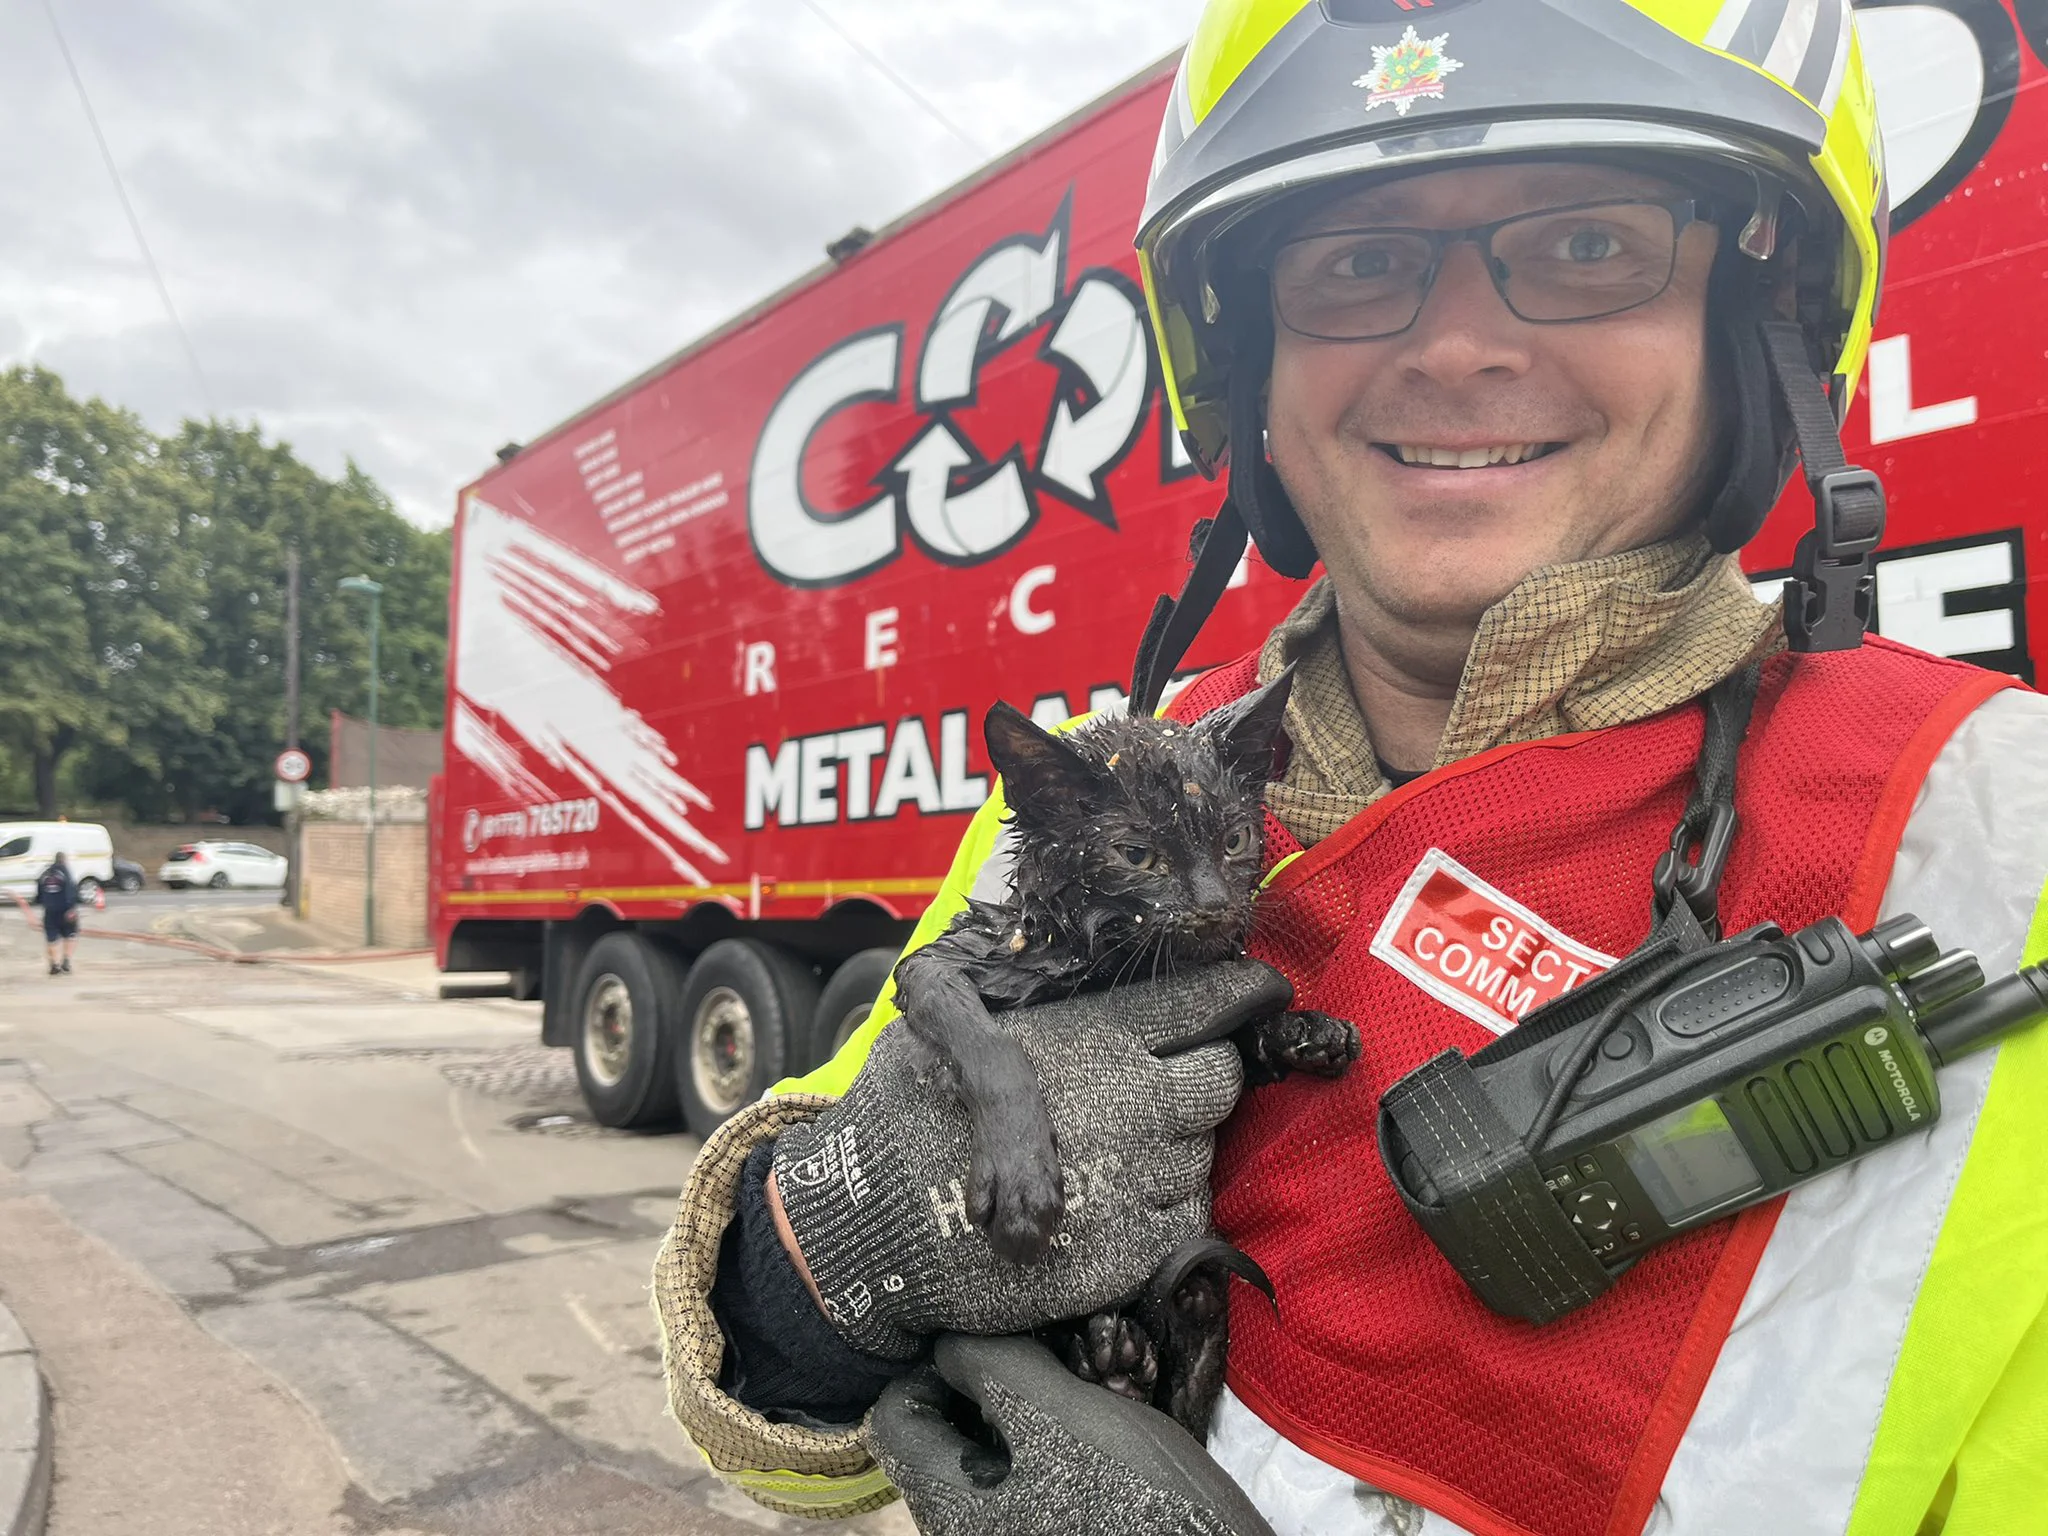 Cat being held by Firefighter after being rescued from fire